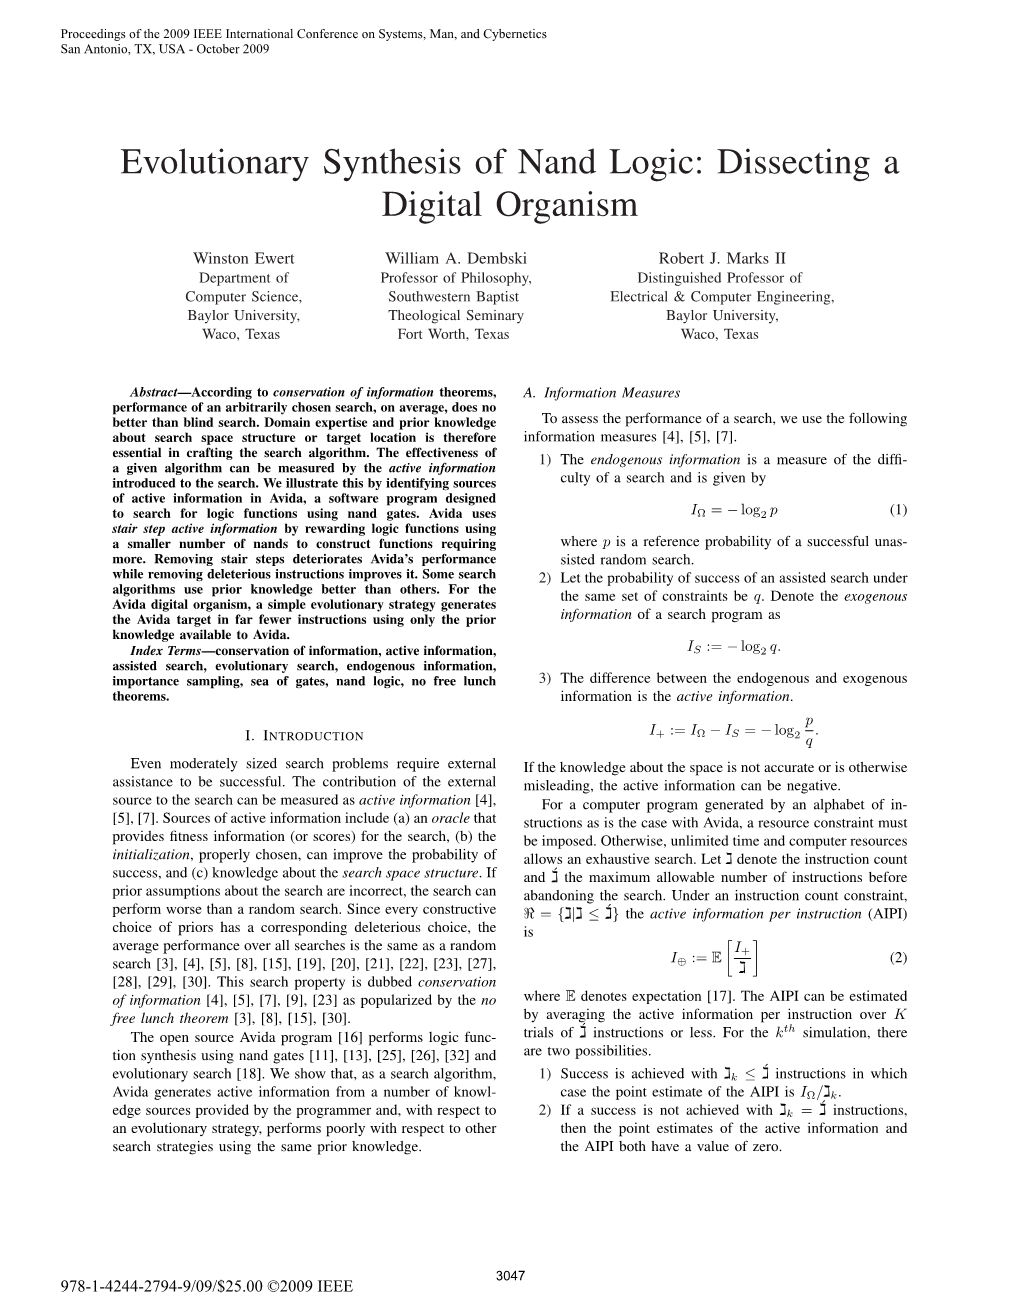 Evolutionary Synthesis of Nand Logic: Dissecting a Digital Organism